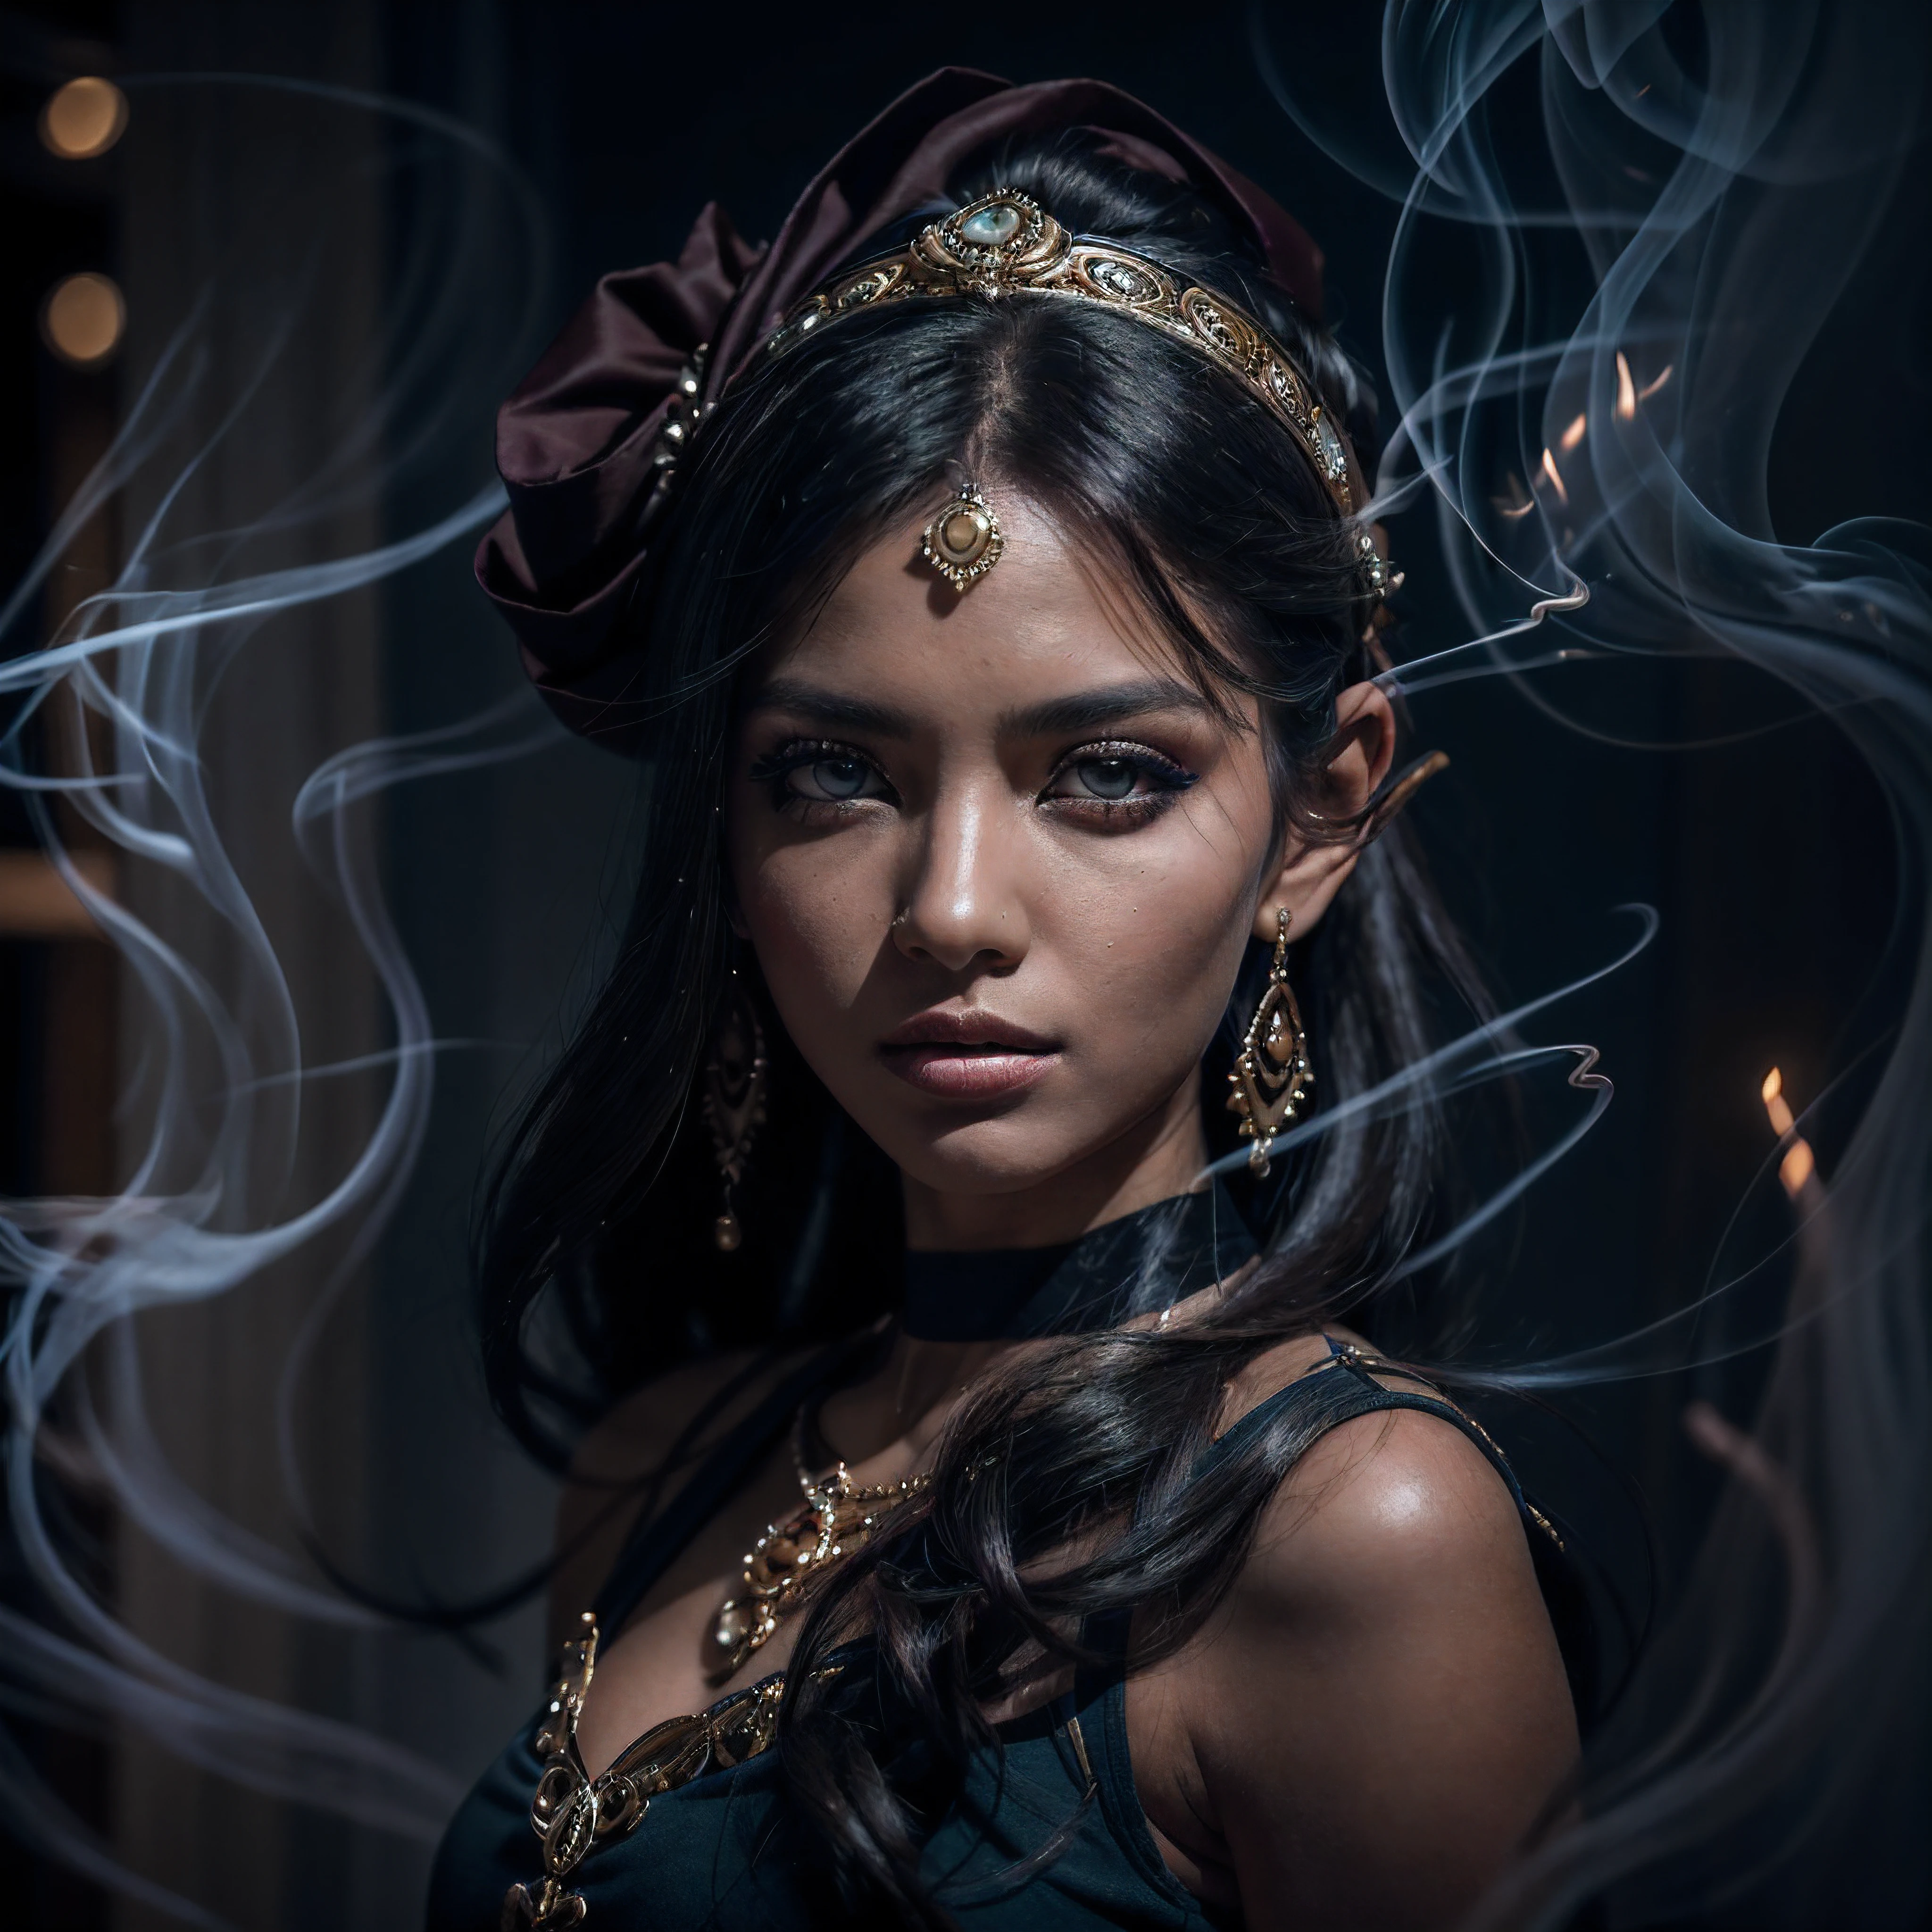 (complex composition:1.3), (detailed and expressive eyes:1.6), (futuristic style), (An exquisite photograph of a female genie made of smoke:1.5), (authentic expression in her eyes: 1.2), (her eyes are portrayed with meticulous attention to detail: 1.3), (wearing dark smoke eye makeup:1.4), The photograph is taken with a lens that emphasizes the depth in her eyes, and the backdrop is a dark studio setting that enhances the colours of the scene. The lighting and shadows are expertly crafted to bring out the richness of her skin tone and the intense atmosphere. Her creative hair adds a touch of contrast against her skin, The overall composition captures her essence with authenticity and grace, creating a portrait that celebrates her heritage and beauty. Photography utilizing the best techniques for shadow and lighting, to create a mesmerizing portrayal that transcends the visual, slightly tilted head,